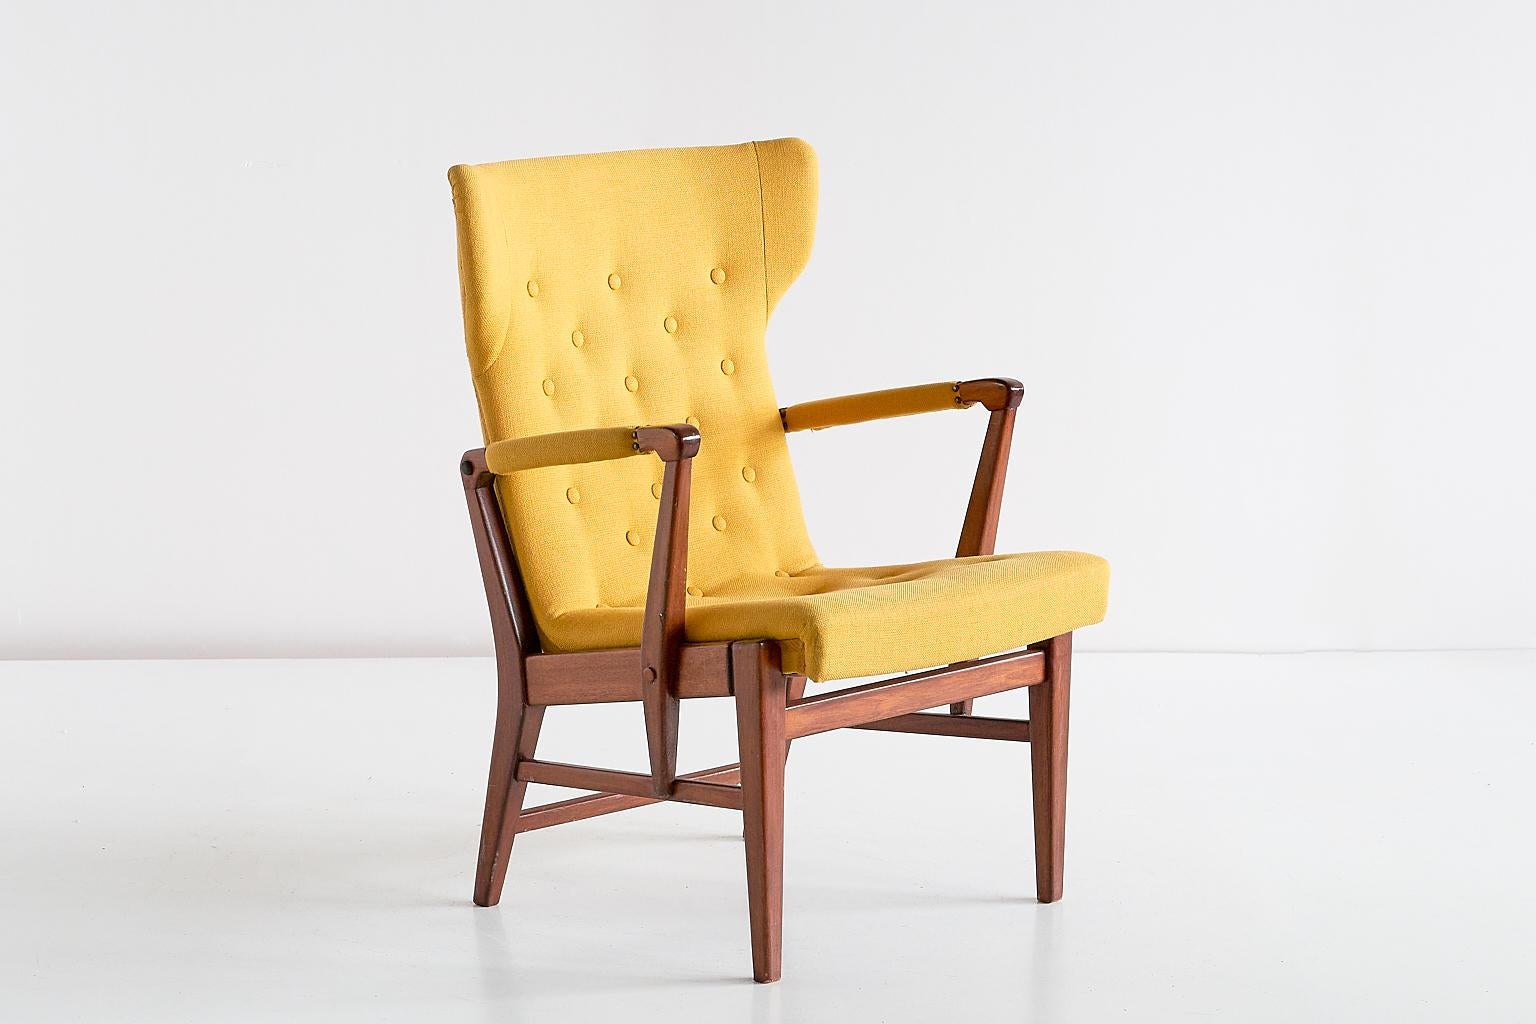 Pair of Bertil Söderberg Armchairs in Mahogany for Nordiska Kompaniet, 1940s In Good Condition For Sale In The Hague, NL